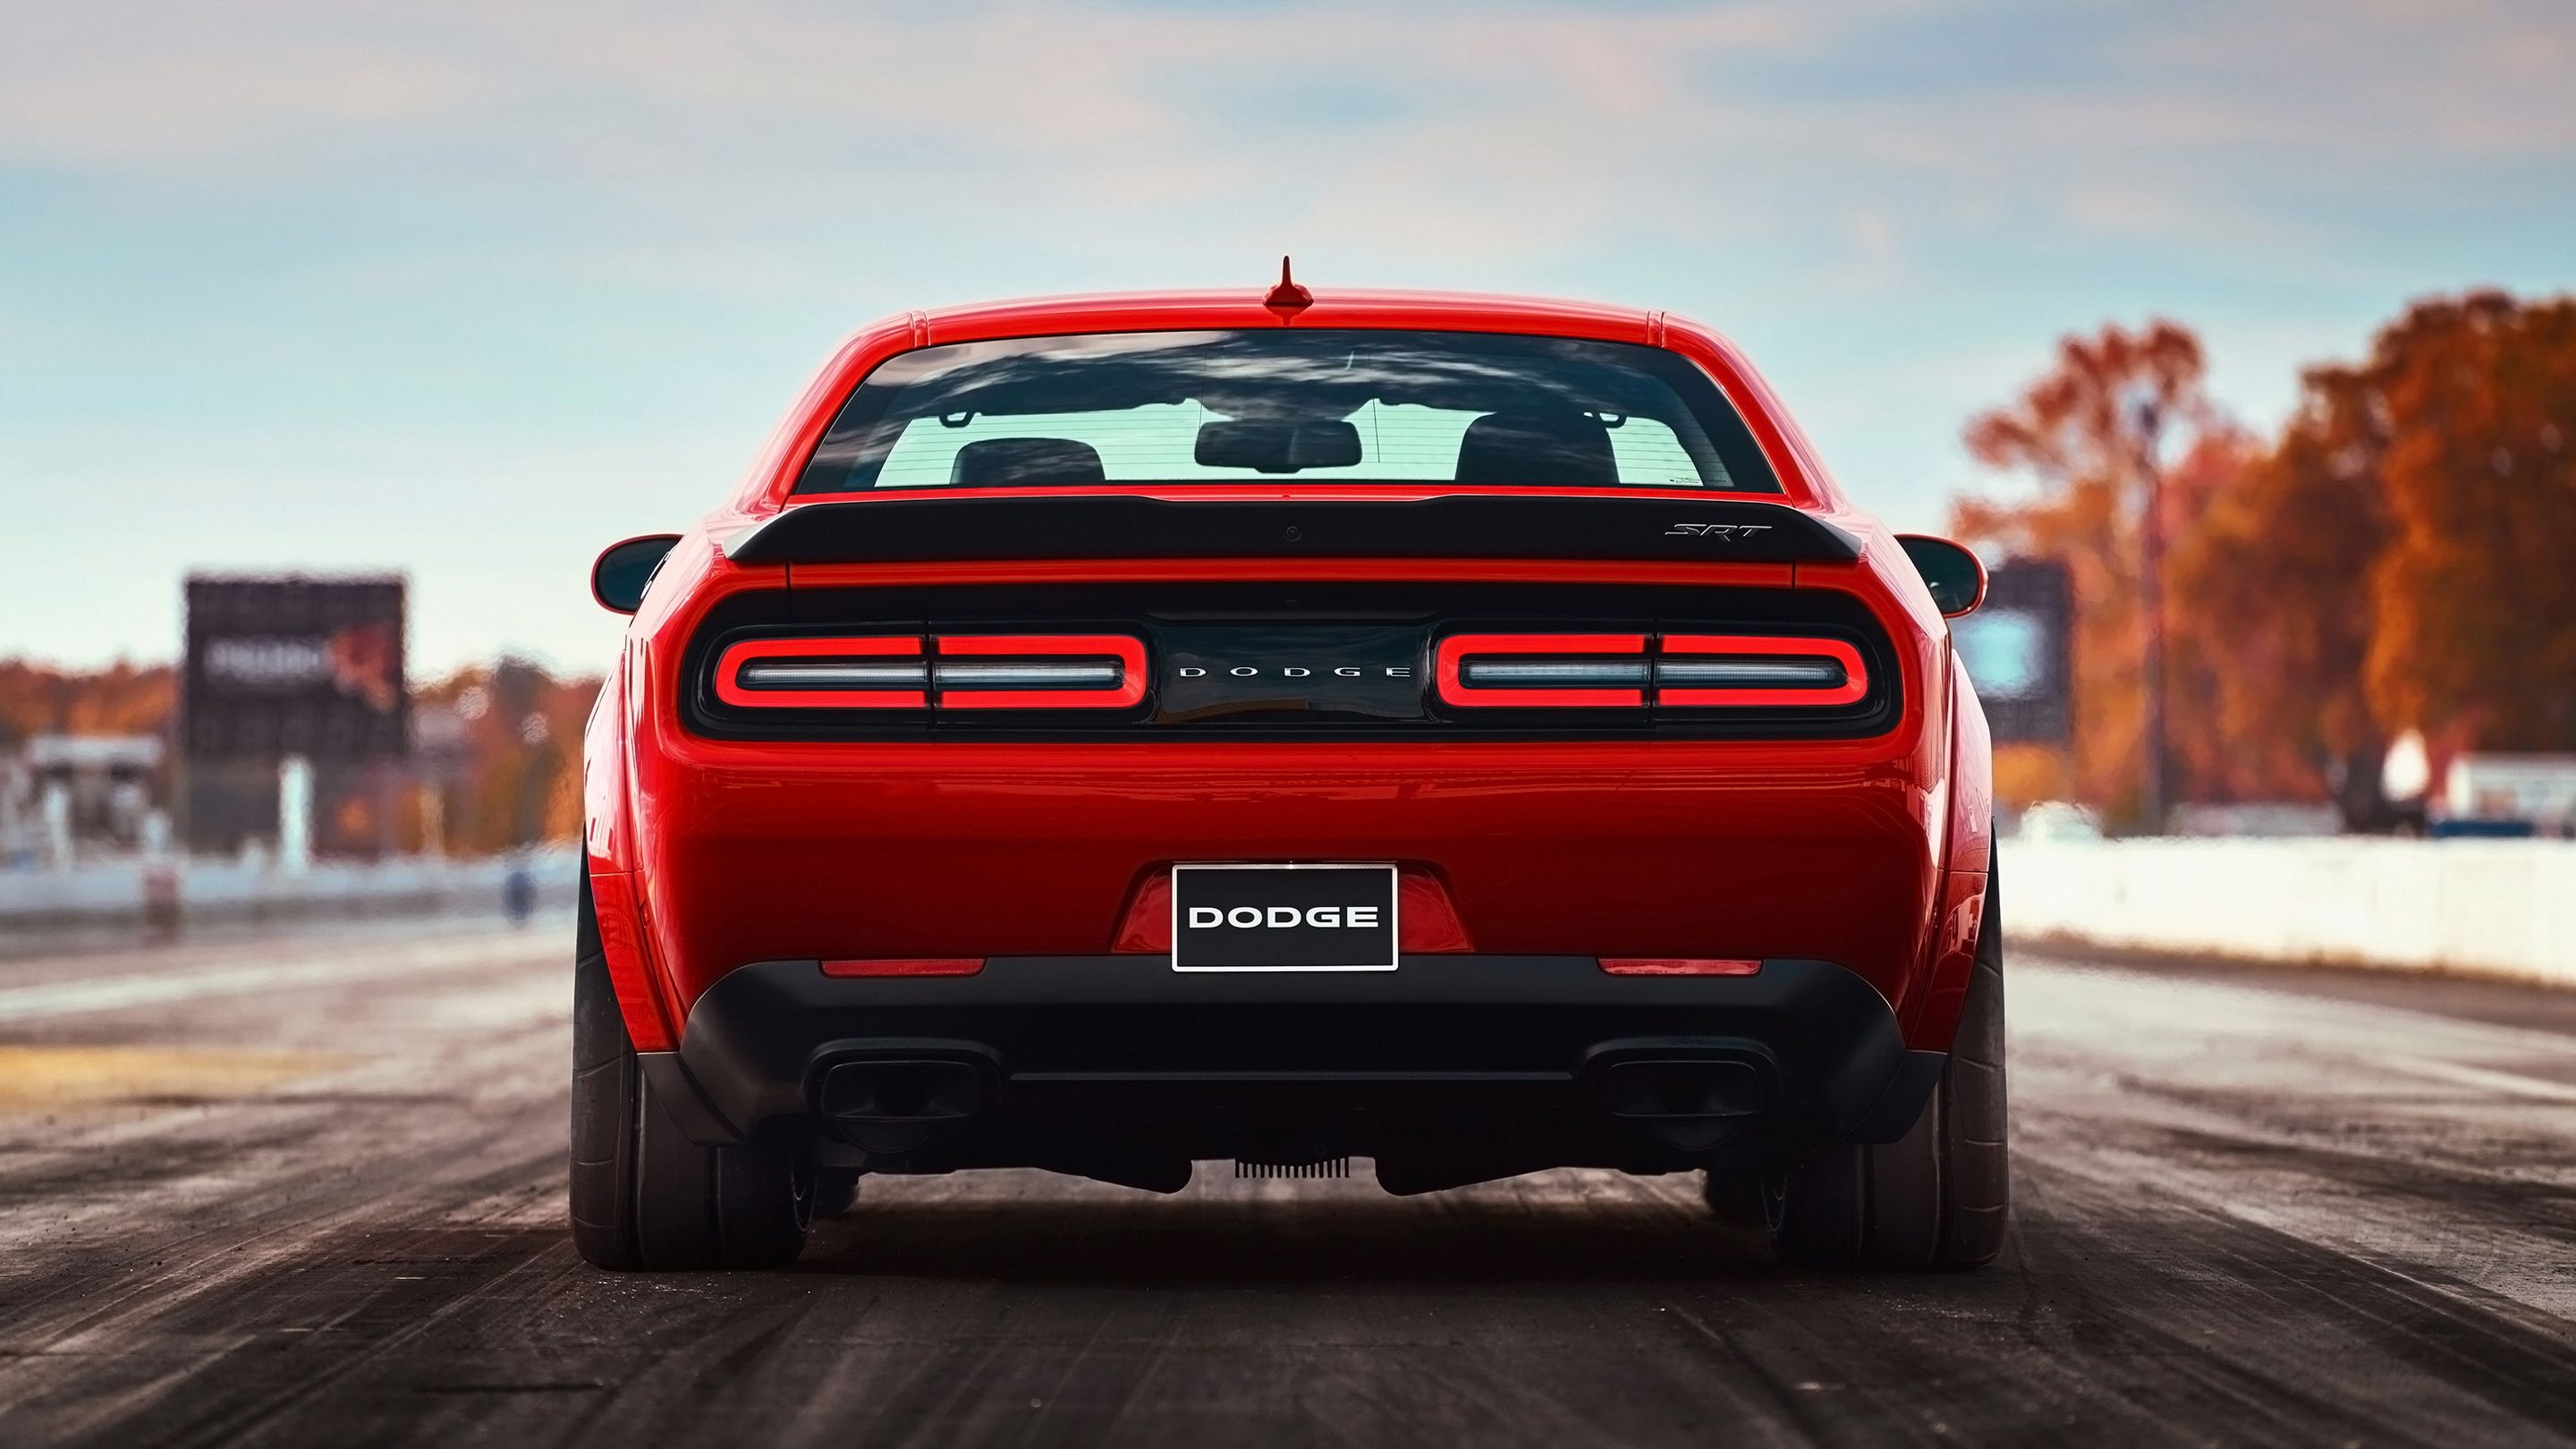 Dodge, Customizable wallpaper, Personalize your computer, Express your style, 2880x1620 HD Desktop